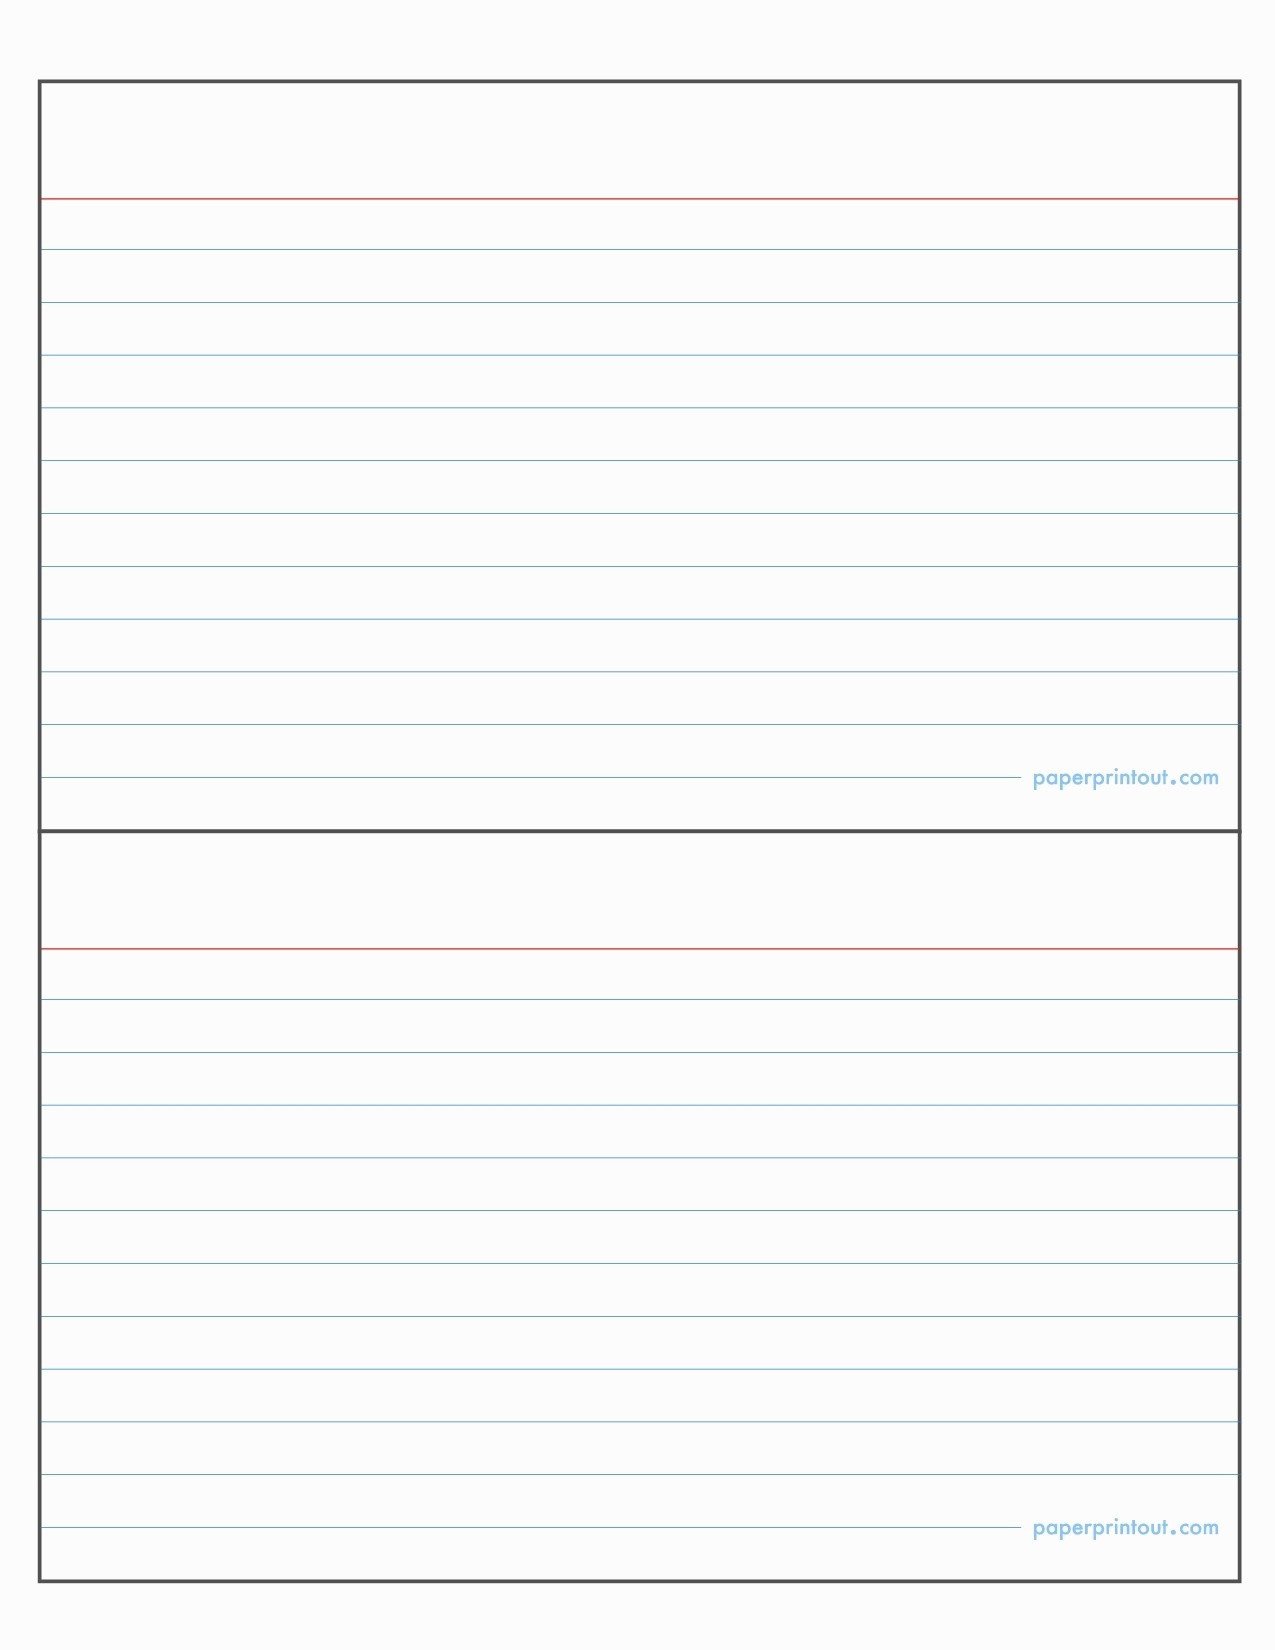 Index Card Template Google Docs Seven Shocking Facts About